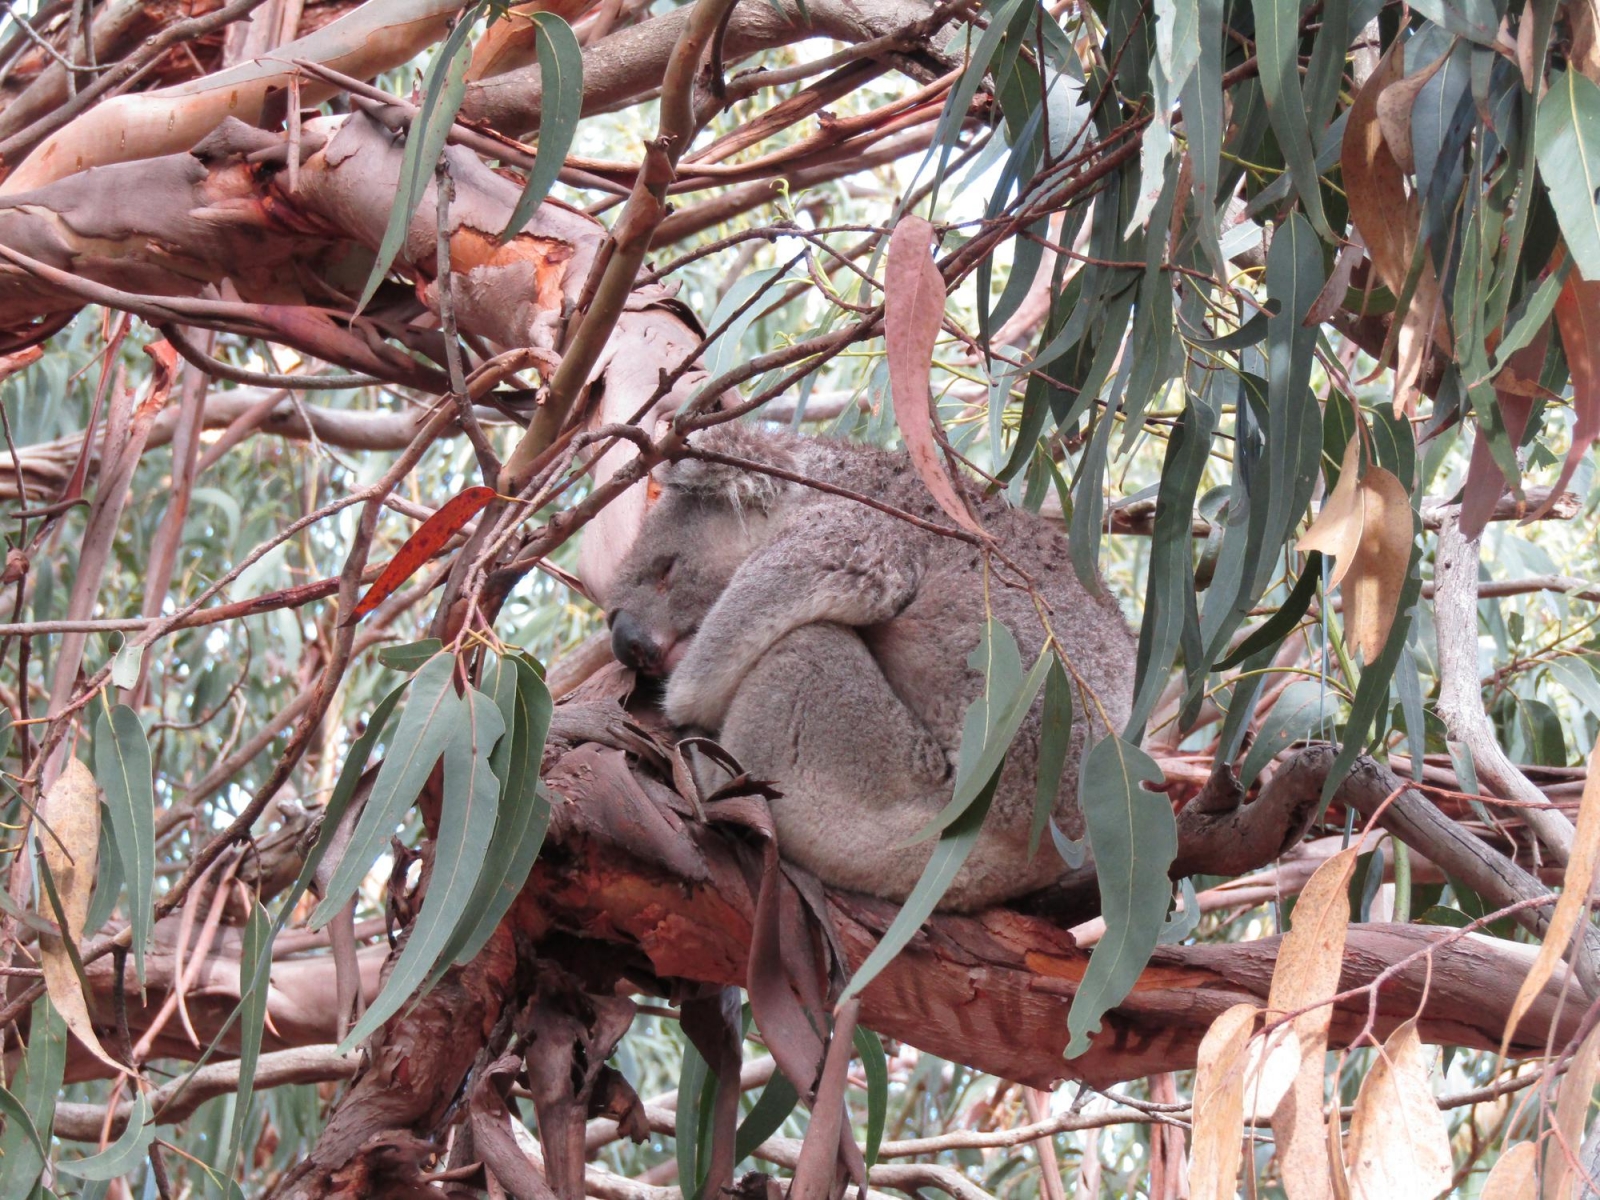 Zonked out in a eucalypus tree.